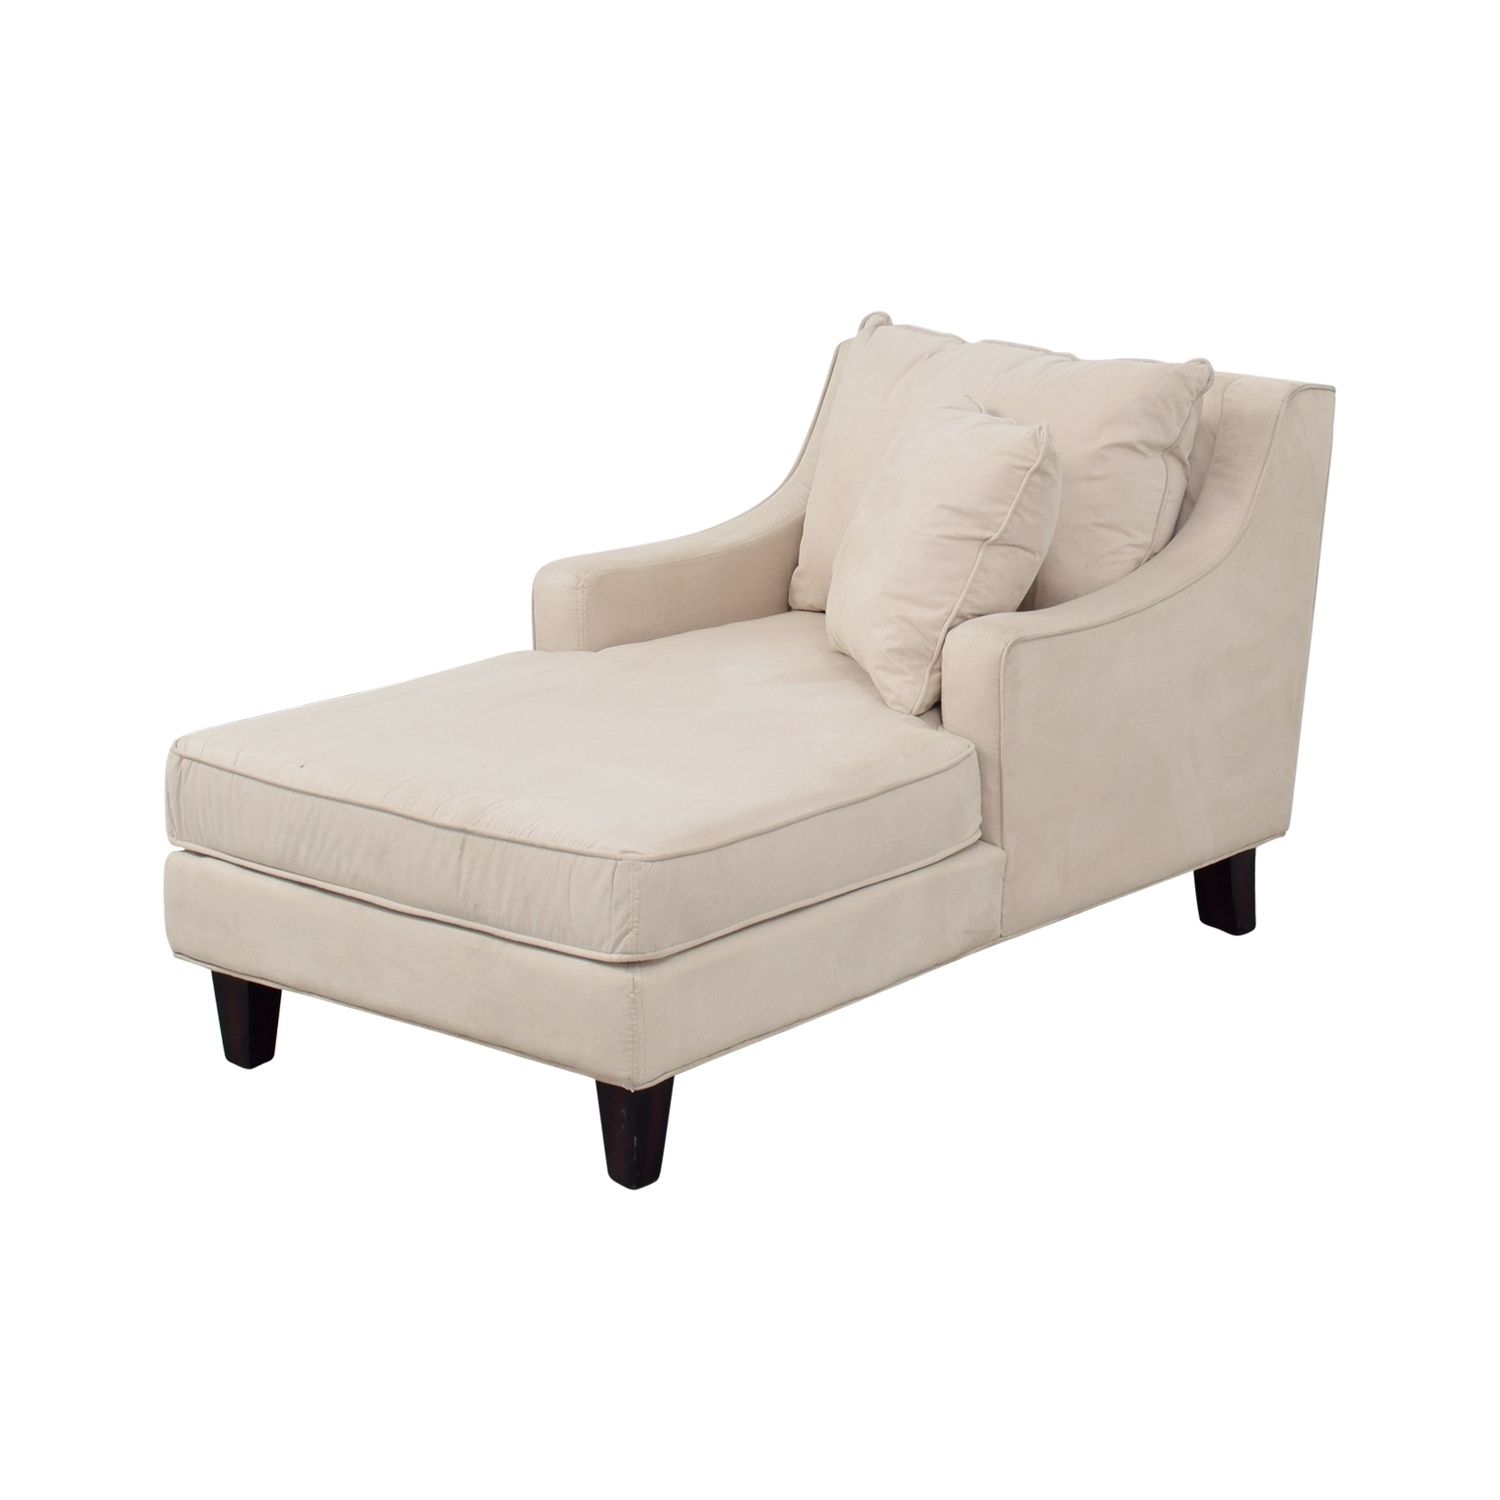 [%80% Off – Coaster Coaster Beige Microfiber Chaise Lounger / Sofas Intended For Recent Microfiber Chaises|Microfiber Chaises With Regard To Most Recently Released 80% Off – Coaster Coaster Beige Microfiber Chaise Lounger / Sofas|2017 Microfiber Chaises Regarding 80% Off – Coaster Coaster Beige Microfiber Chaise Lounger / Sofas|2018 80% Off – Coaster Coaster Beige Microfiber Chaise Lounger / Sofas For Microfiber Chaises%] (View 9 of 15)